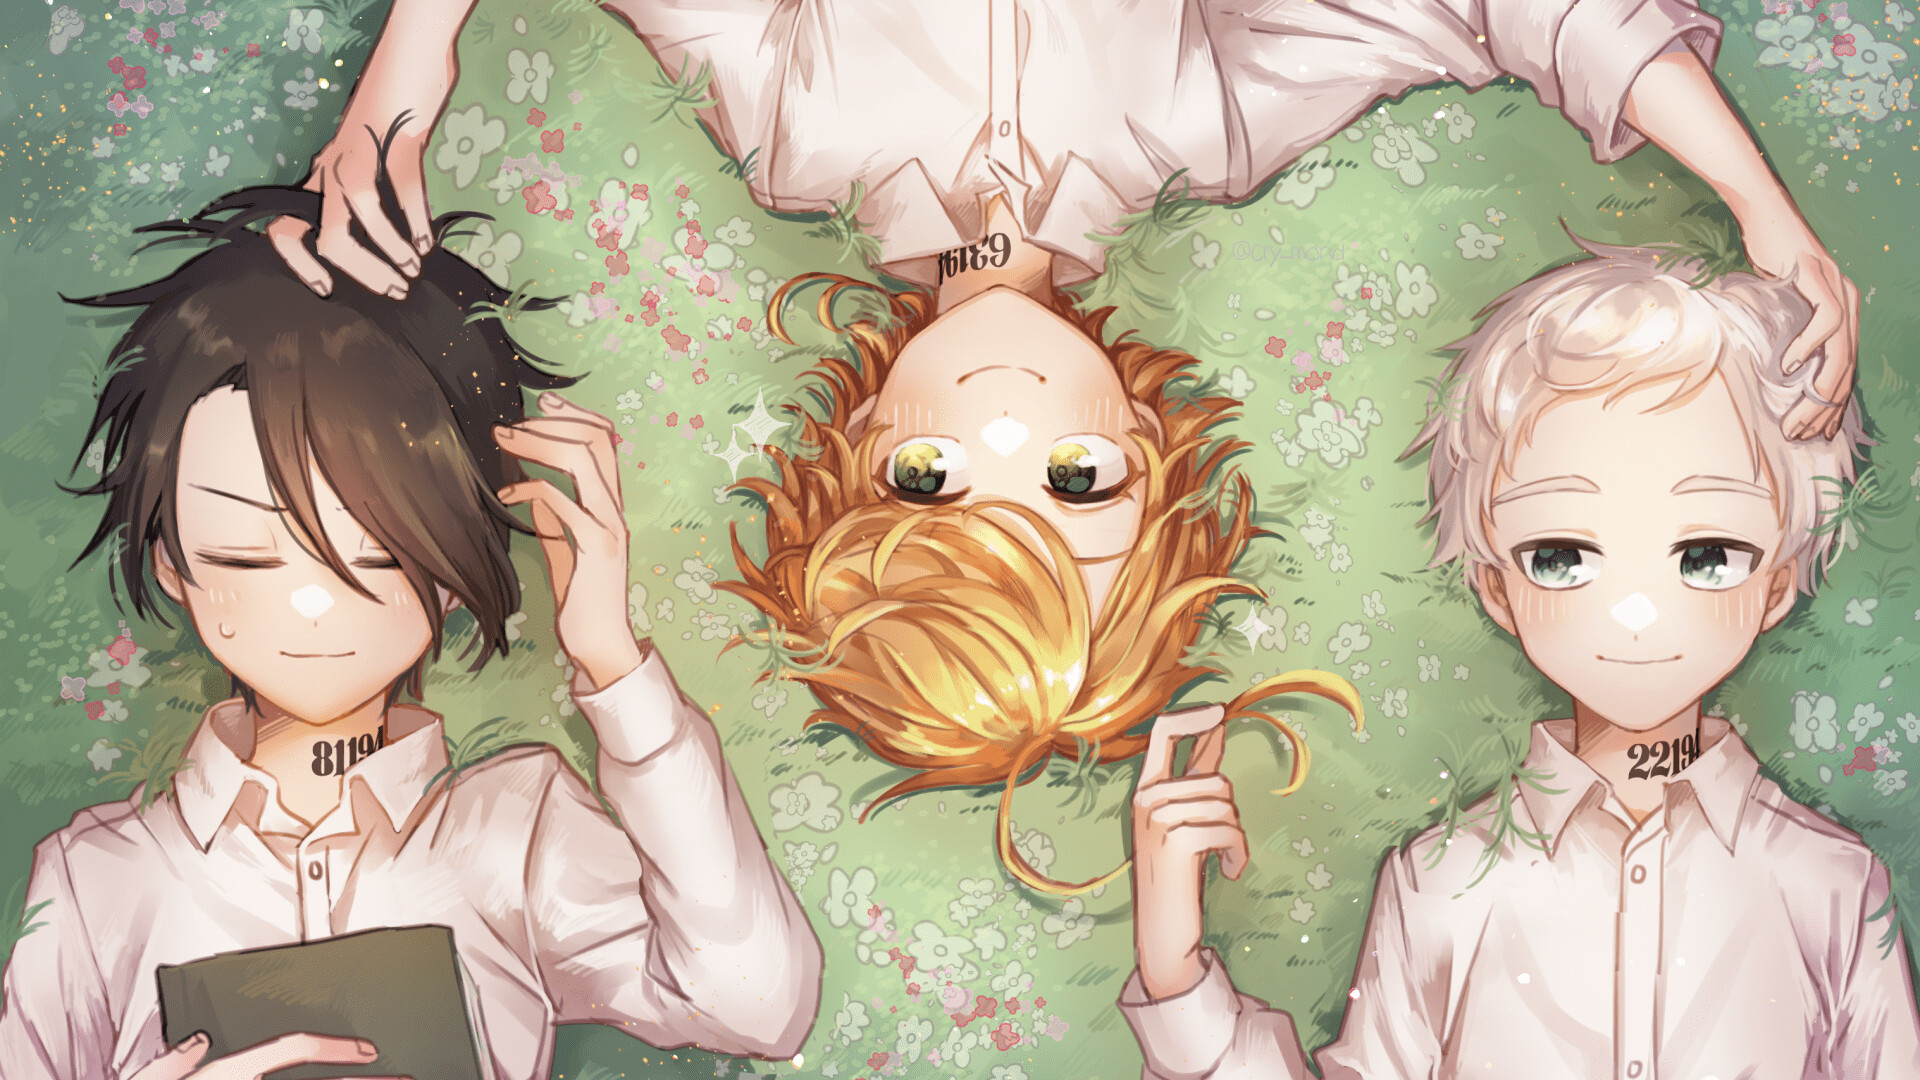 The Promised Neverland: The series began streaming on Netflix in North America and Latin America on September 1, 2020. 1920x1080 Full HD Wallpaper.